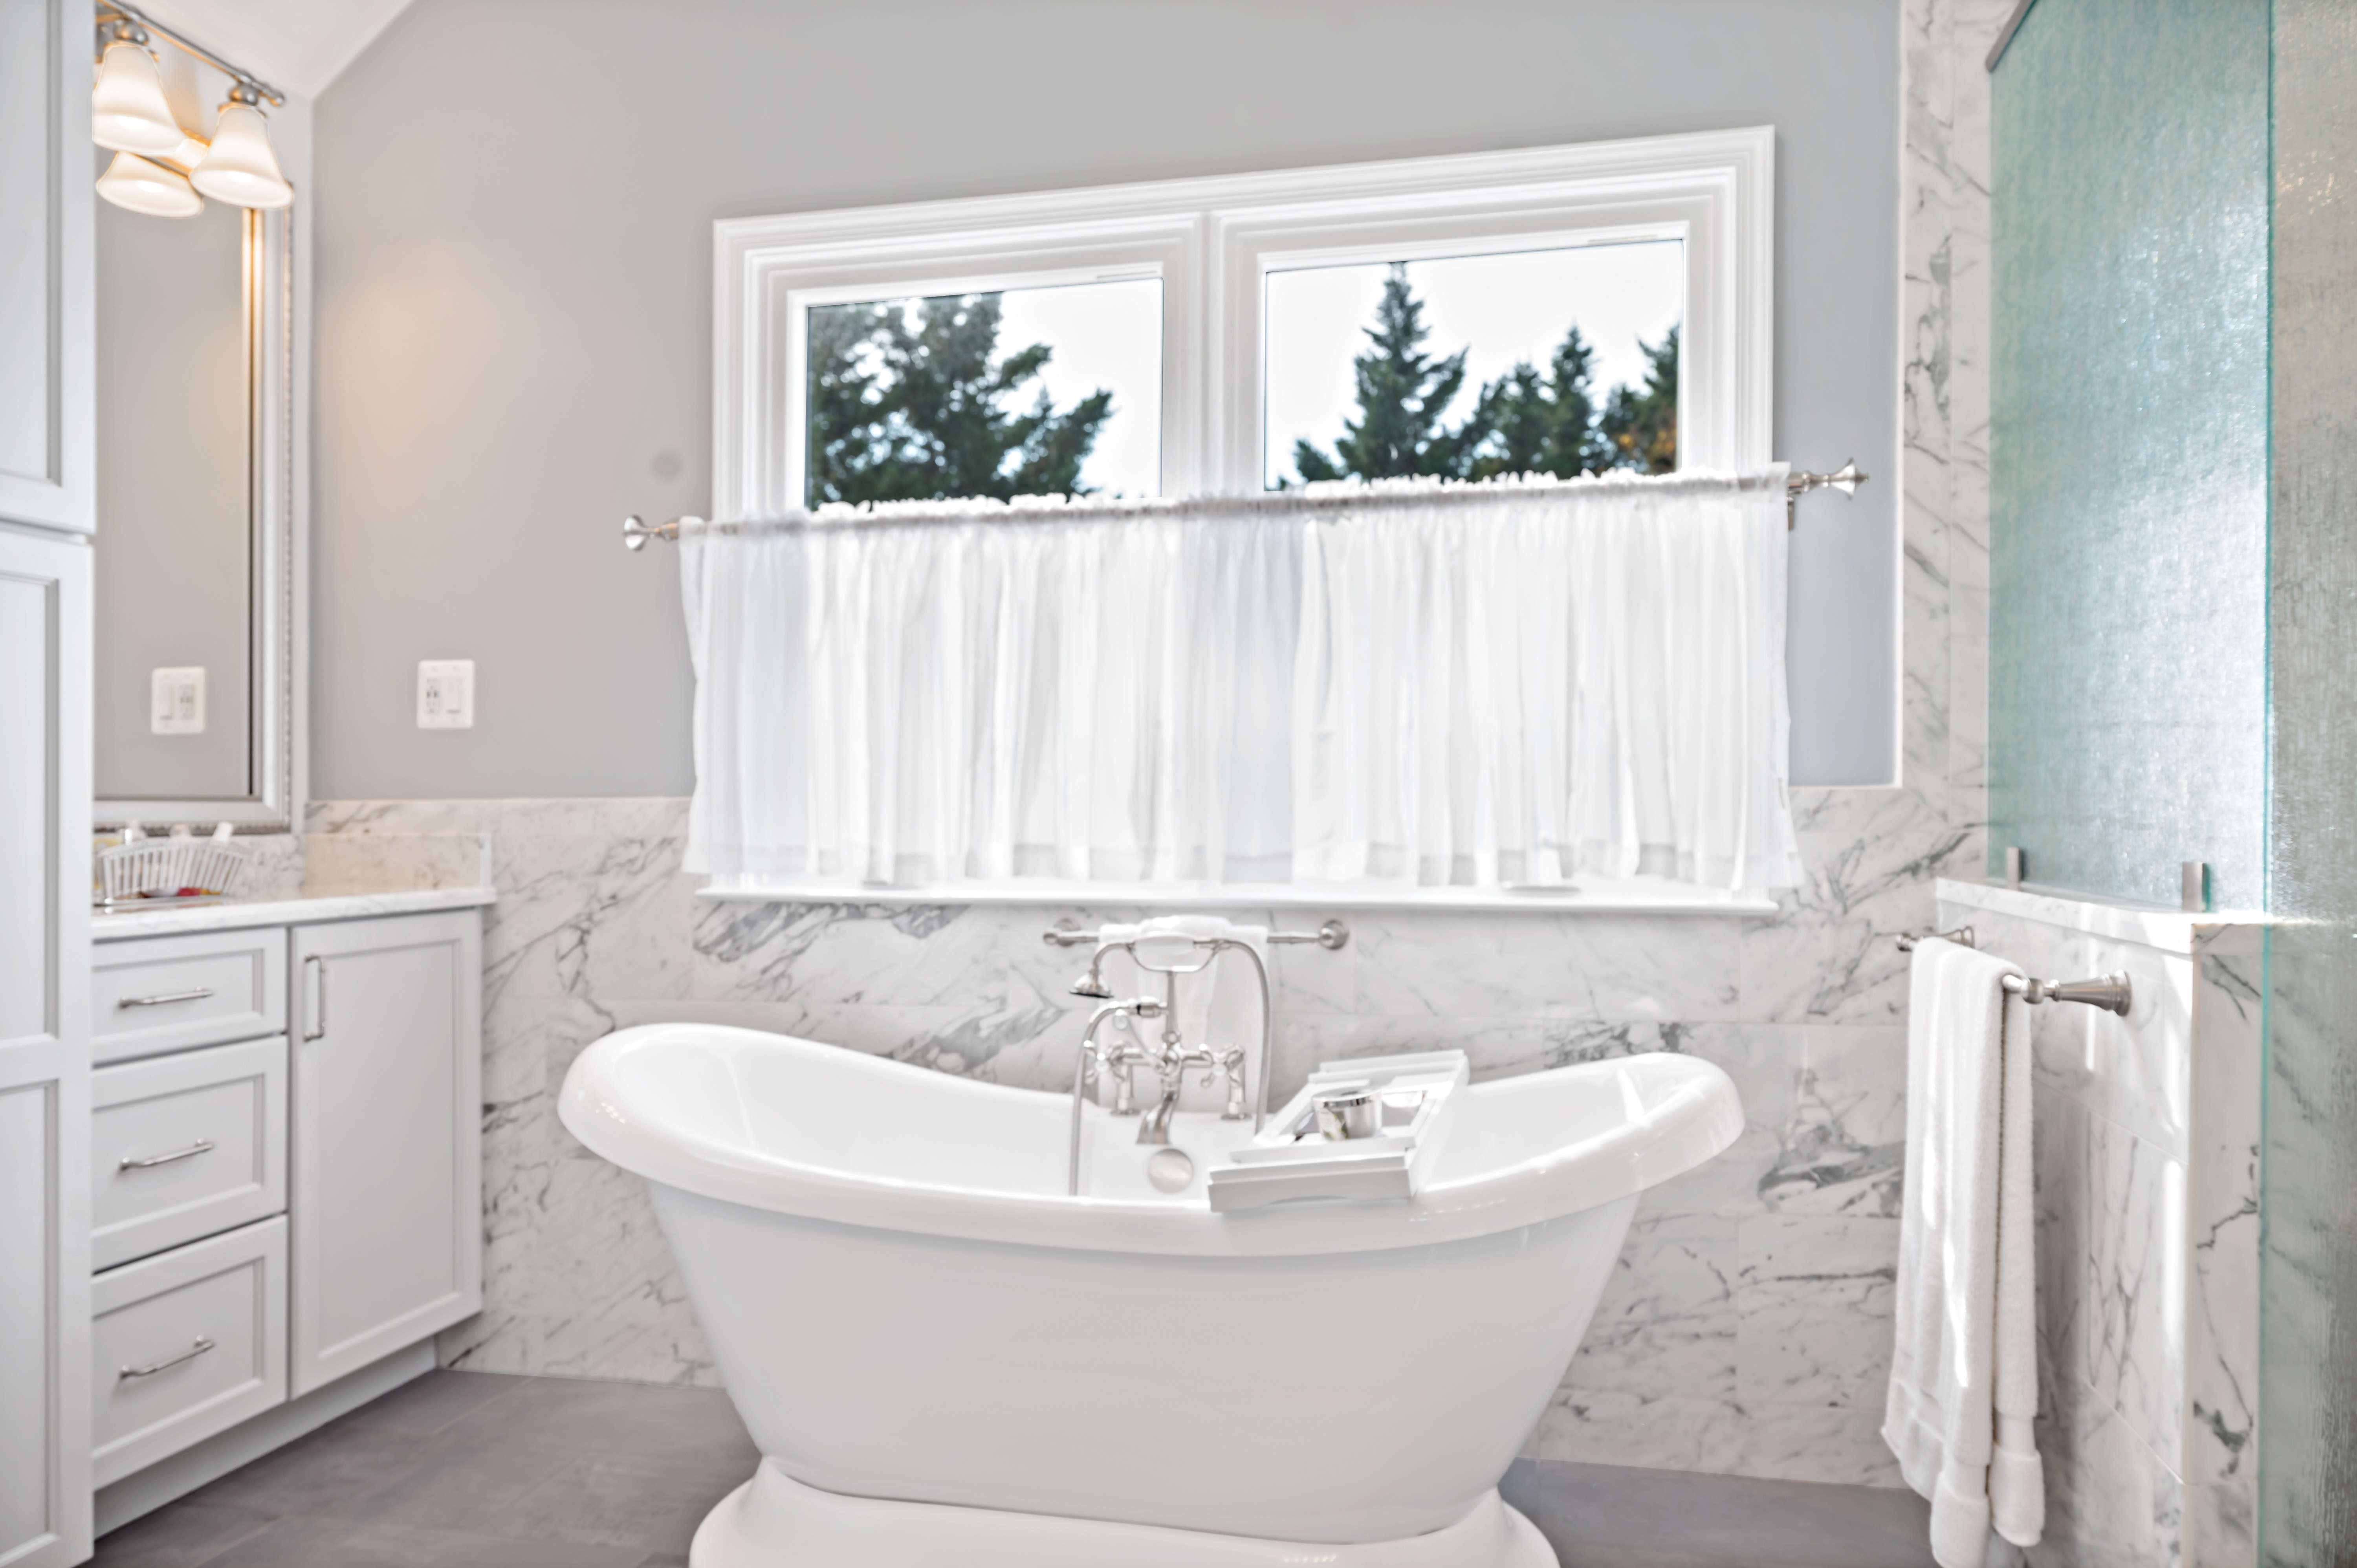 Stand-alone white bathtub with window above